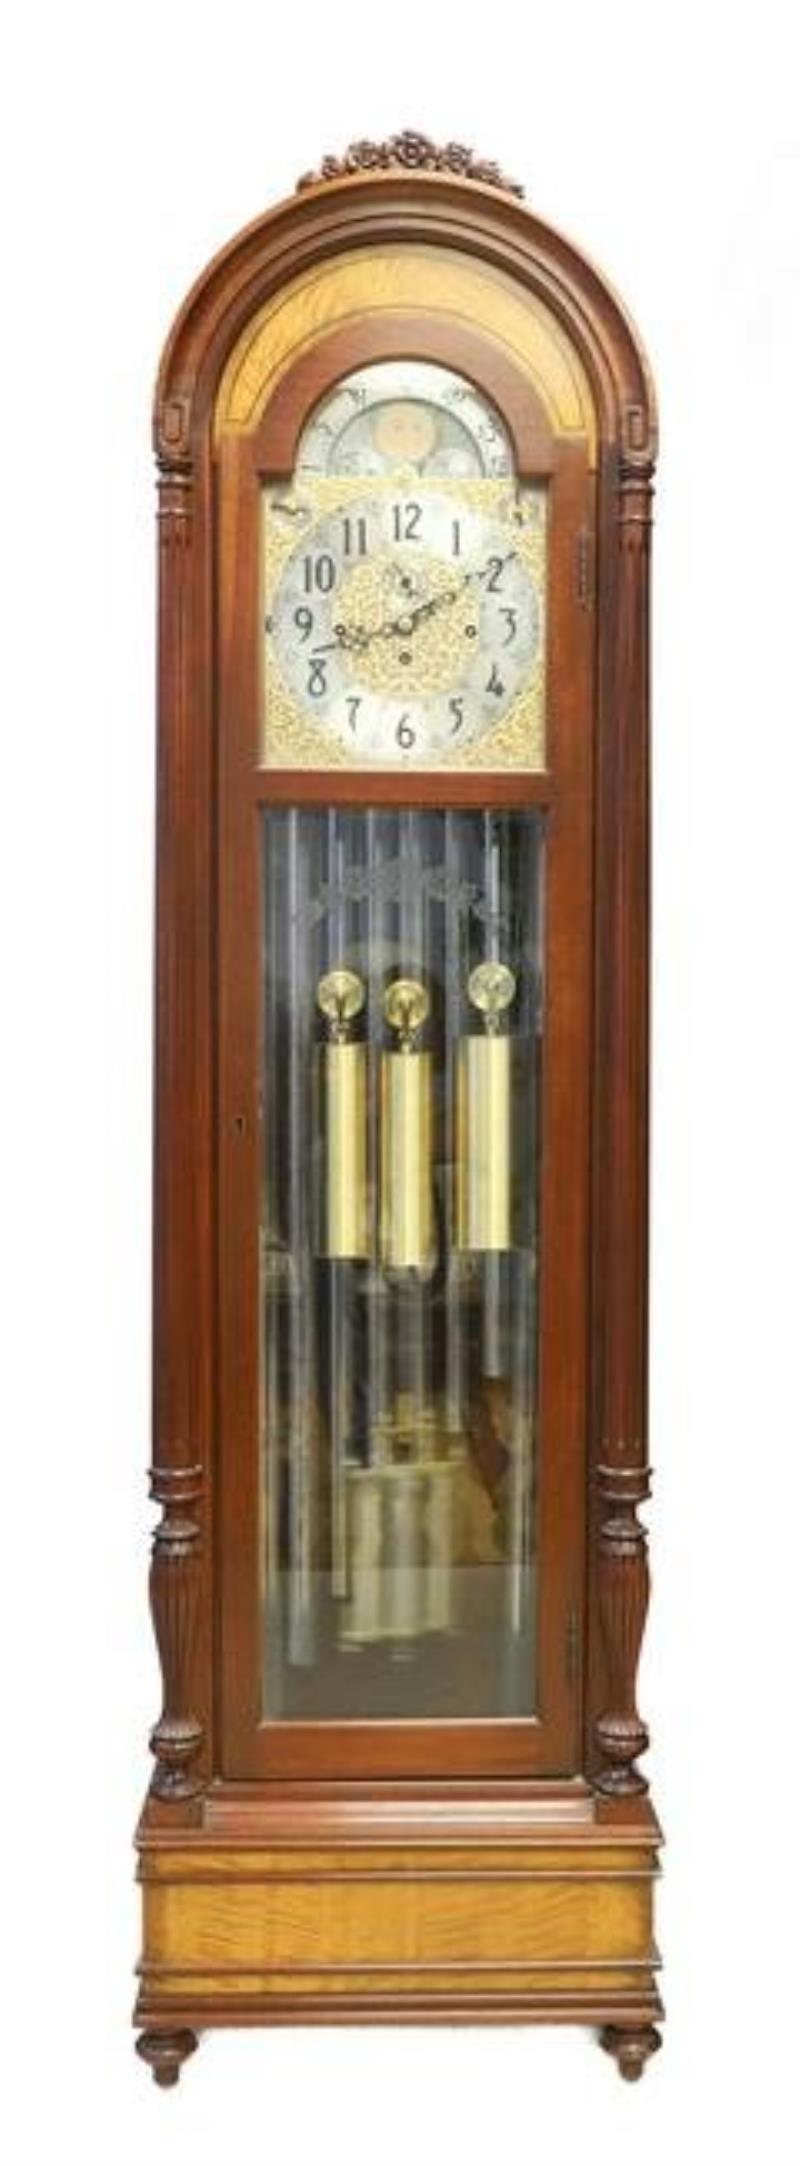 Herschedes 9 Tube Chiming Hall clock